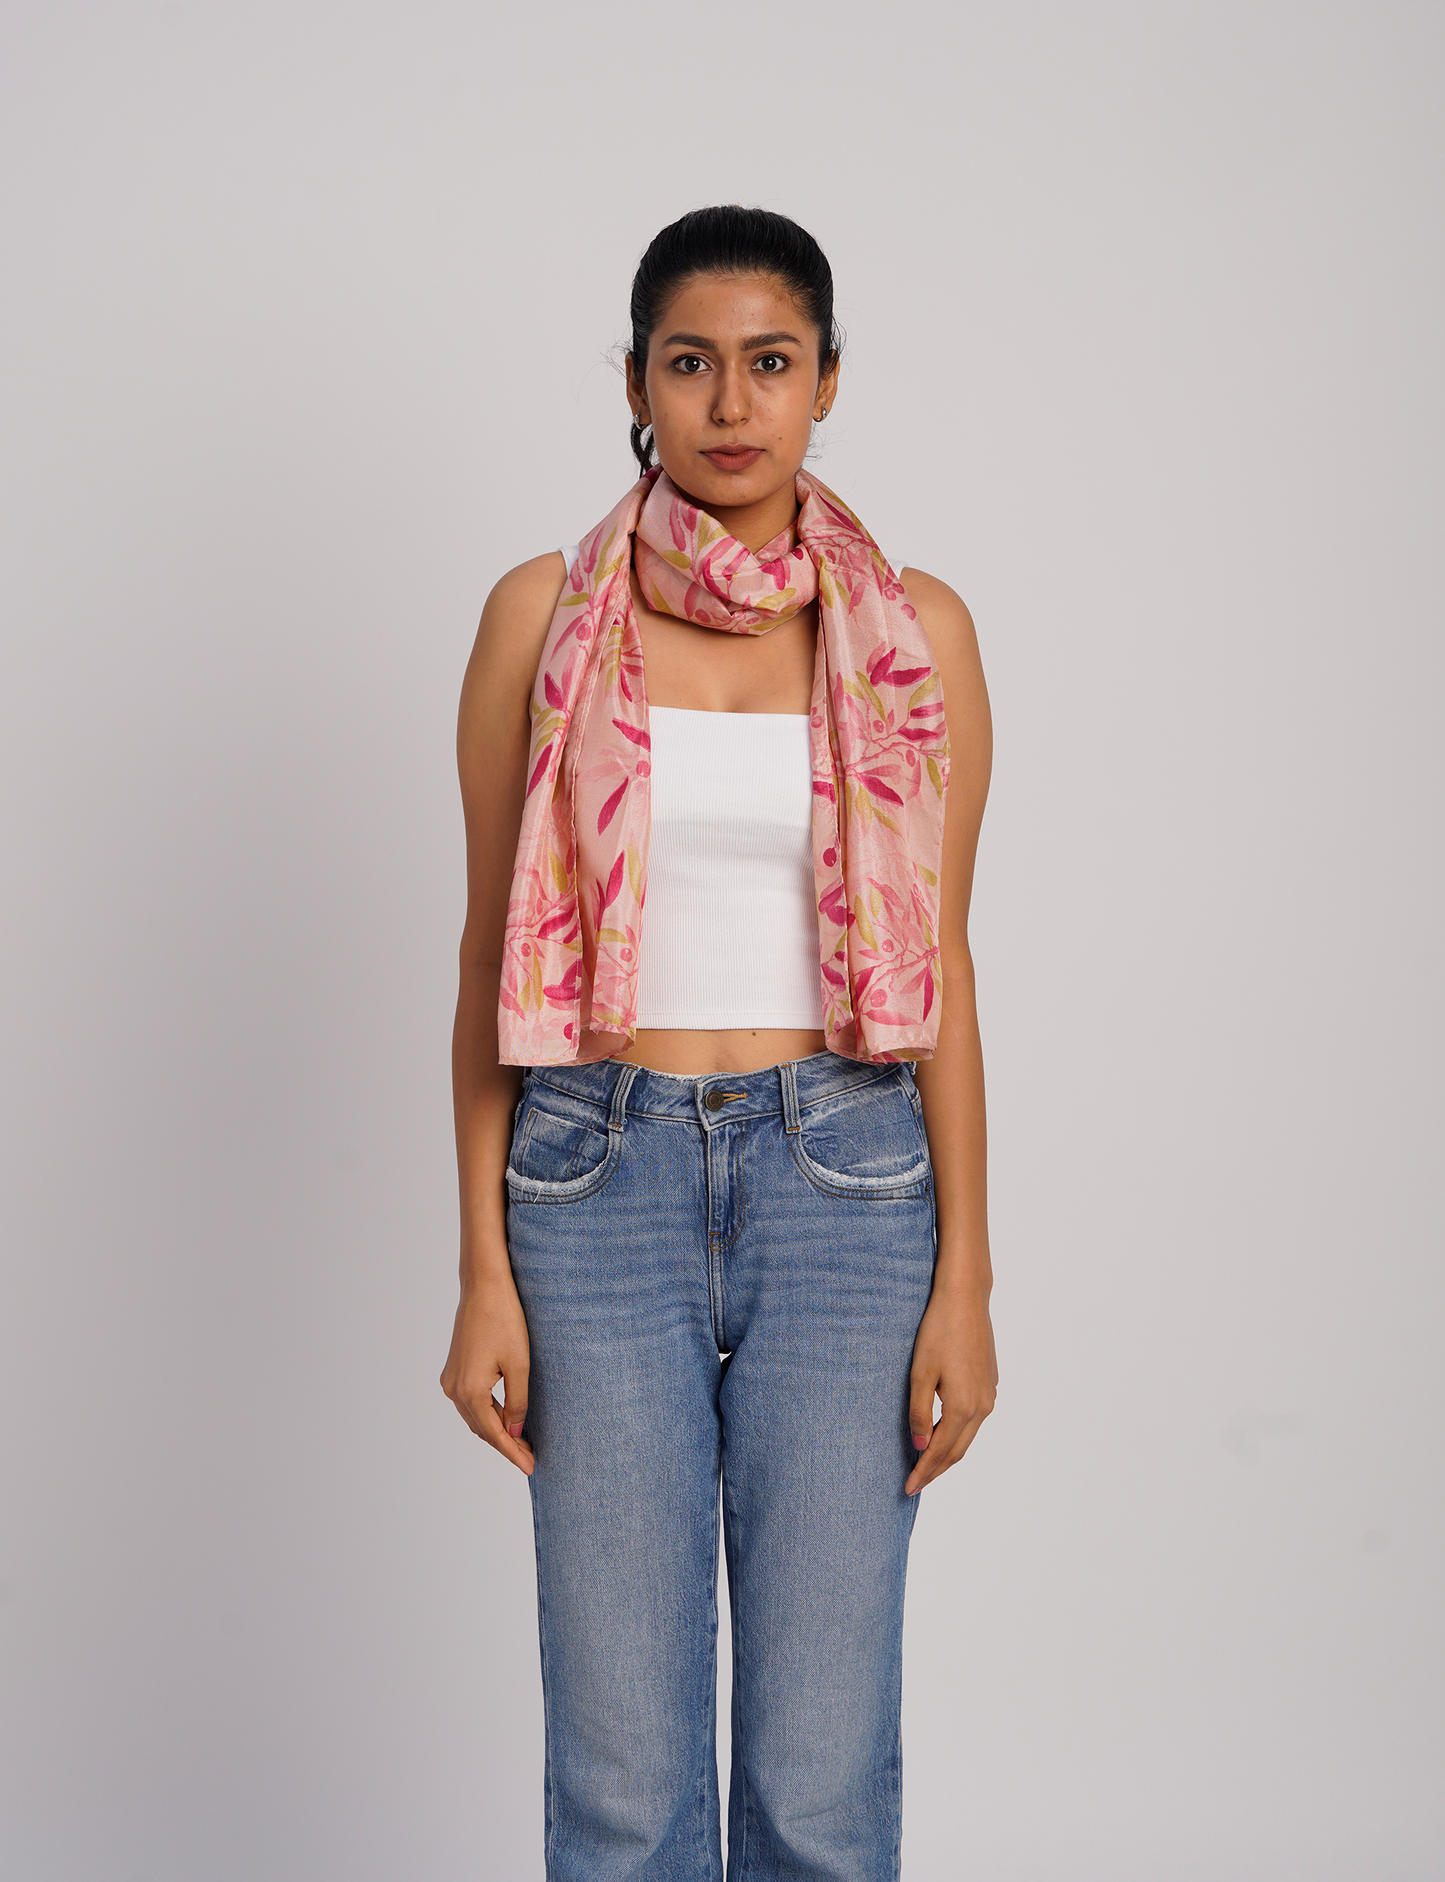 Wrap yourself in style with our printed rectangular stole, designed for neck, shoulders, or waist. Ethically crafted and embracing sustainability, this versatile accessory is a perfect addition to your wardrobe. Experience the beauty of eco-friendly fashion with our conscious clothing collection.